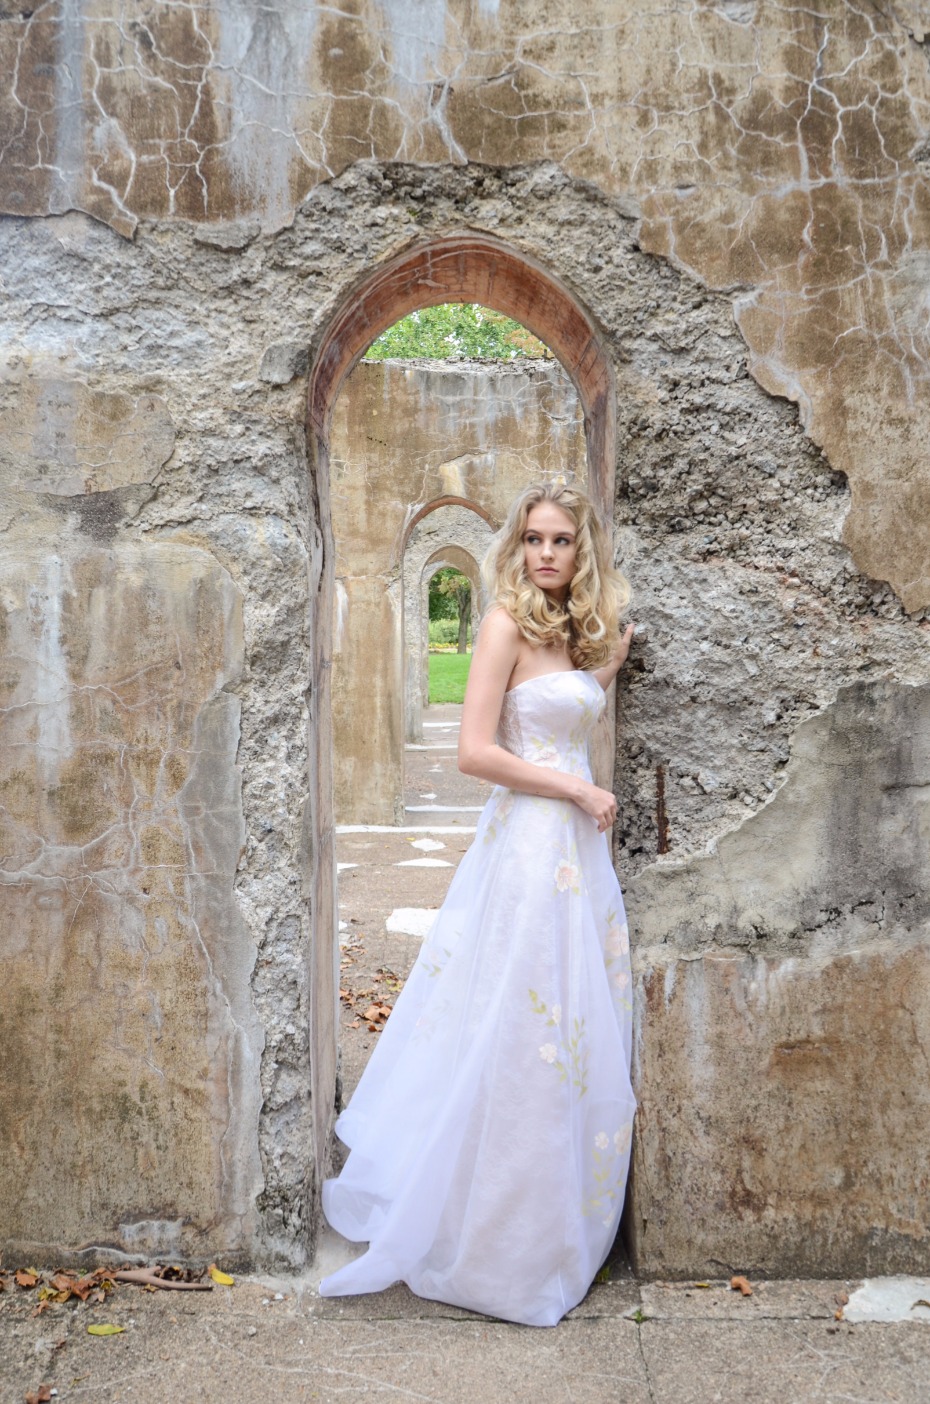 Find your dream dress with Barbara Kavchok